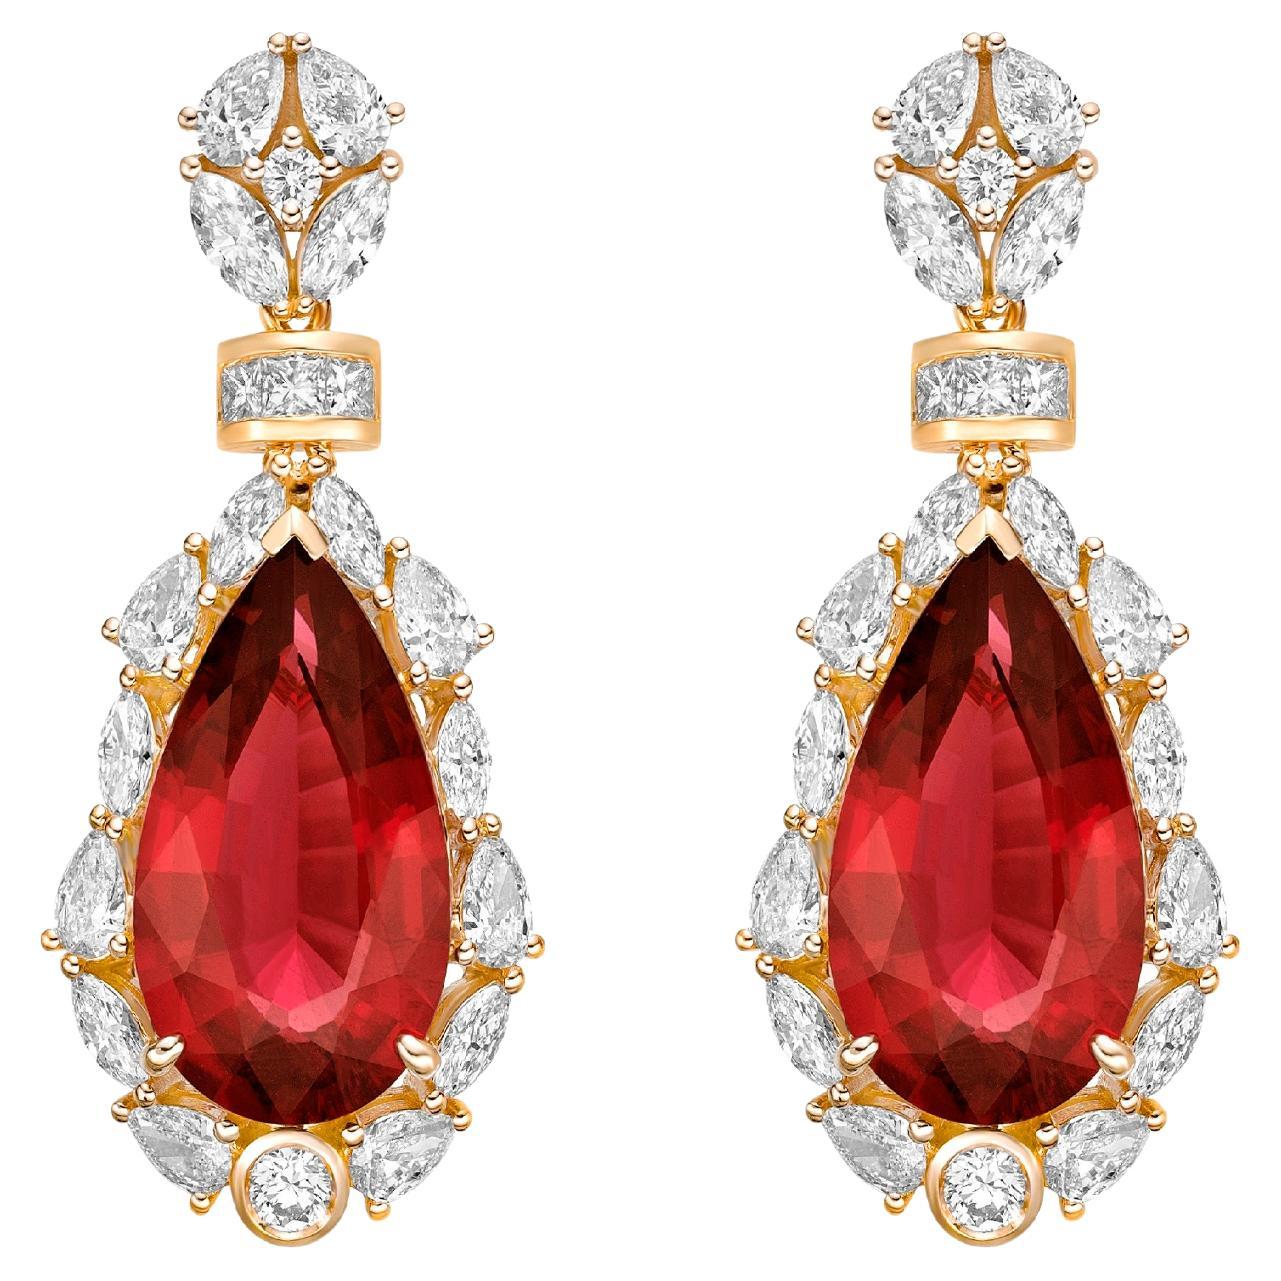 13.842 Carat Rubellite Drop Earrings in 18Karat Yellow Gold with White Diamond. For Sale